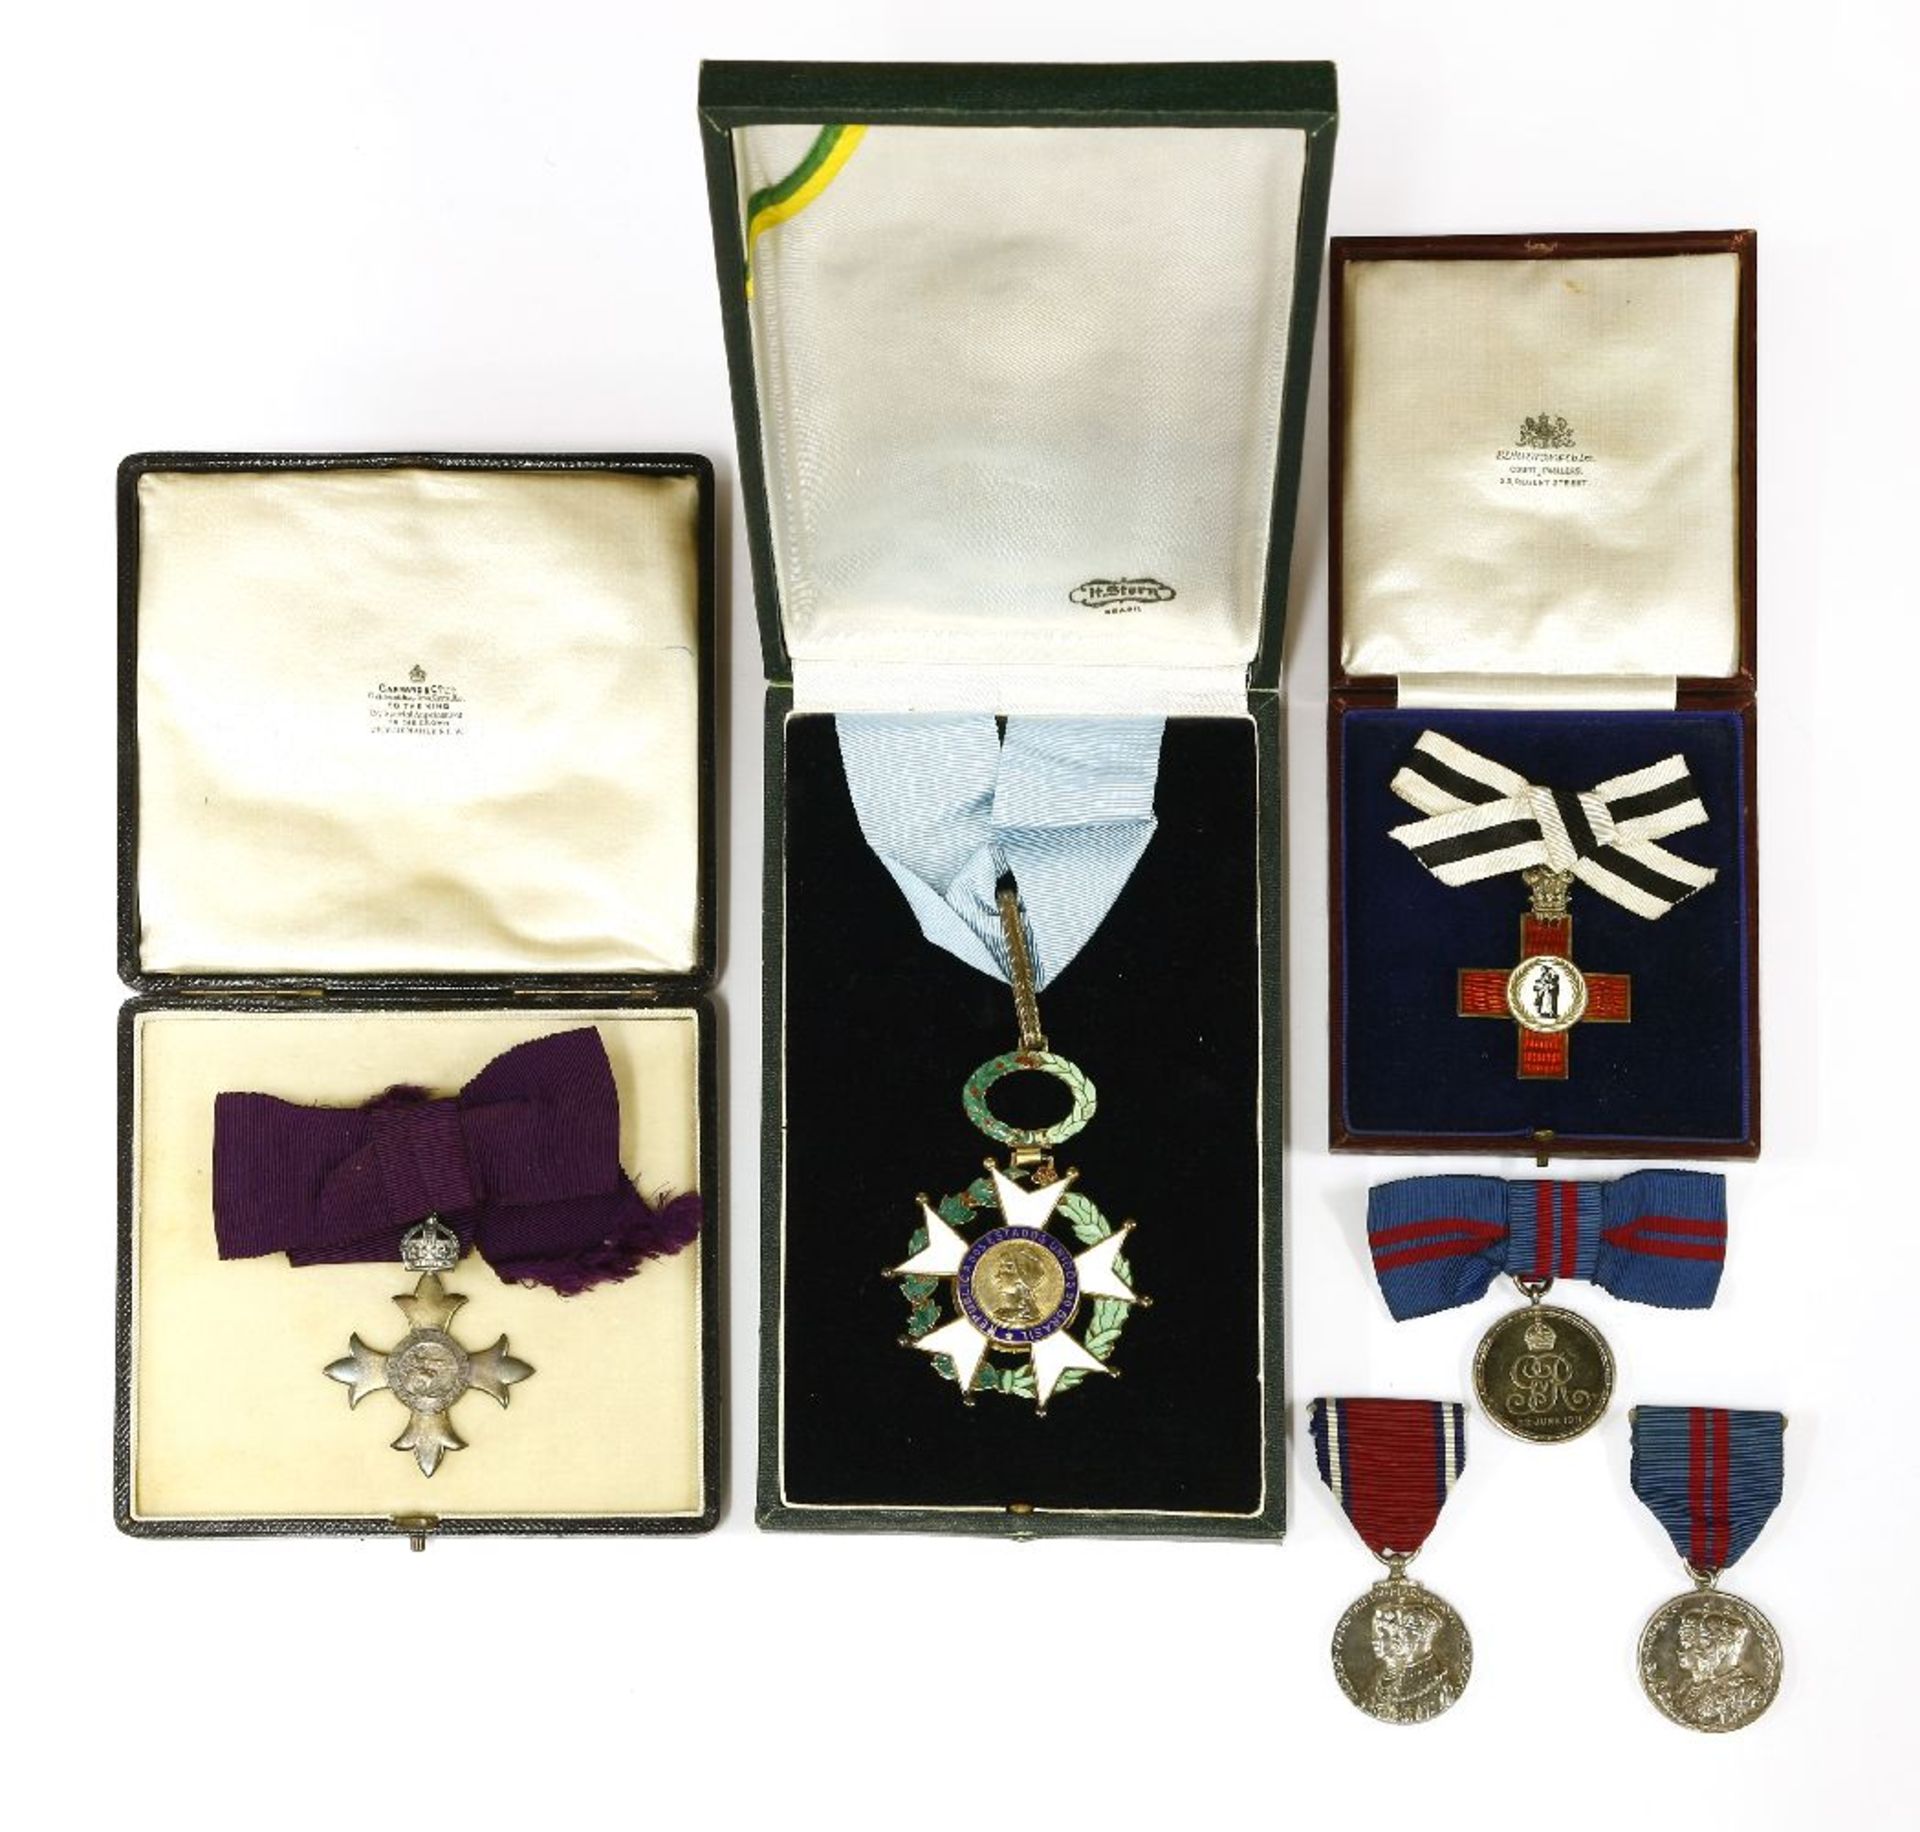 An Order of the Southern Cross,Brazil 1968, in original card box,two George V 1911 coronation